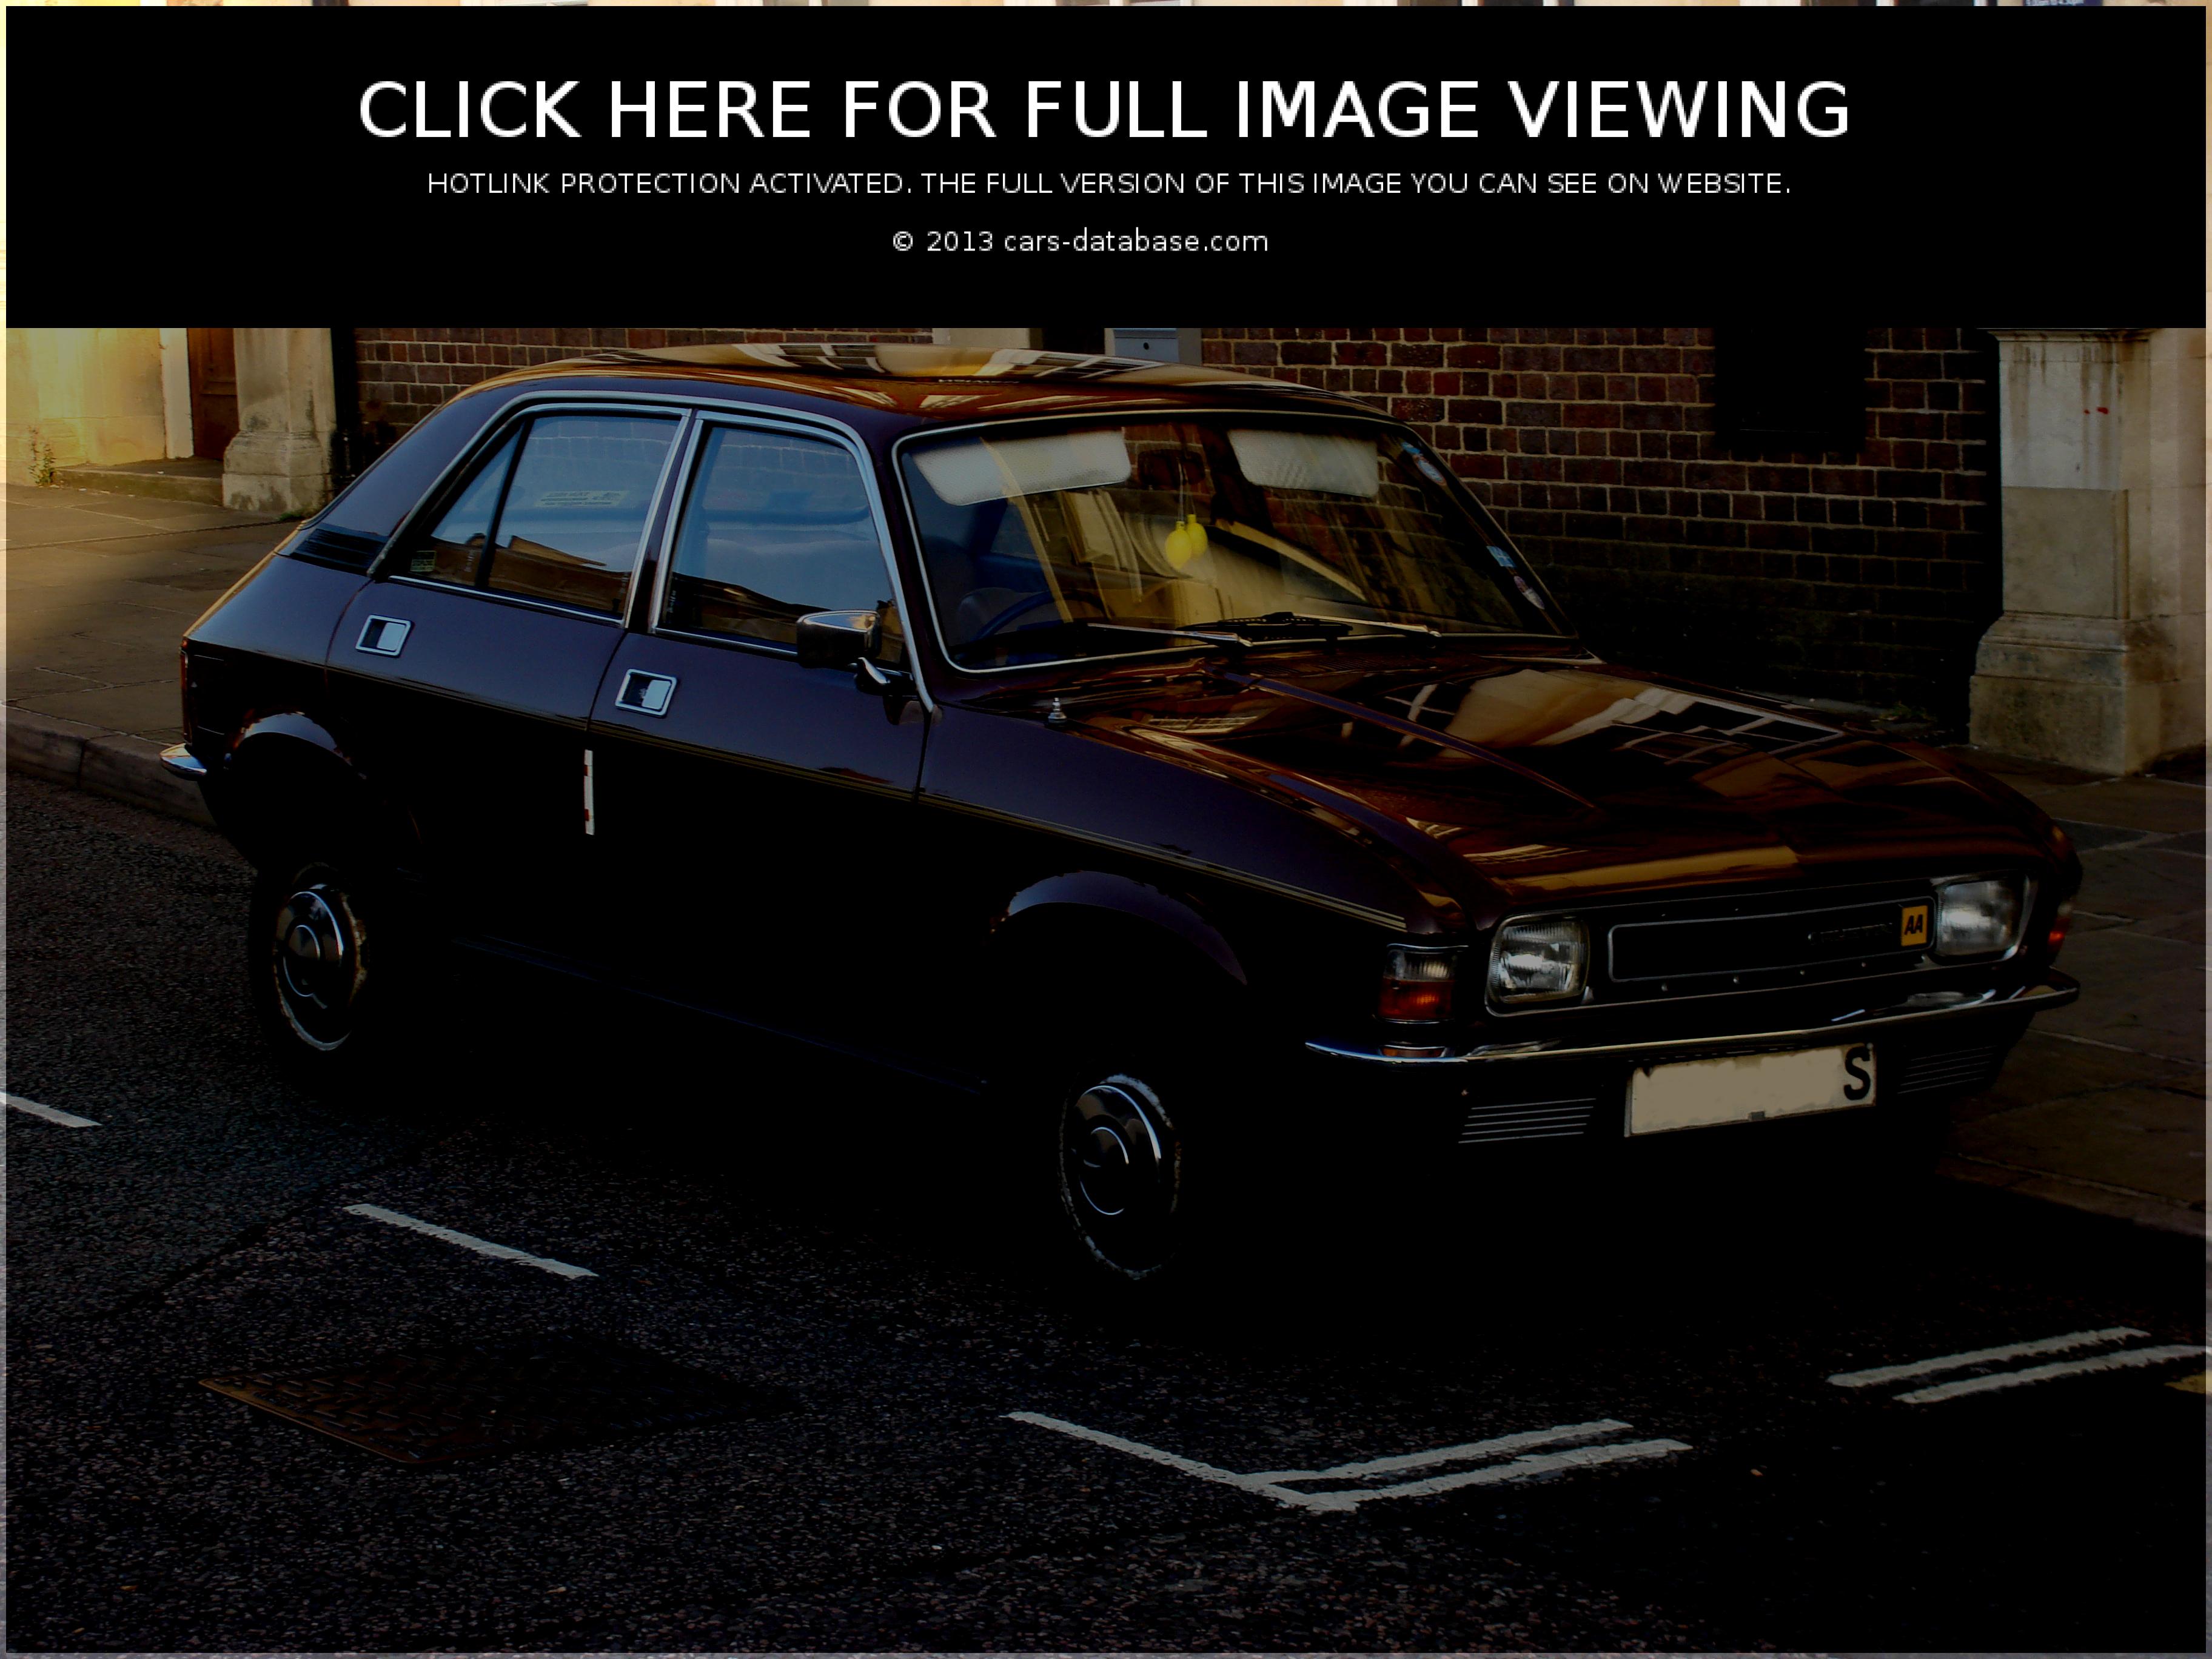 Austin Allegro: Information about model, images gallery and ...